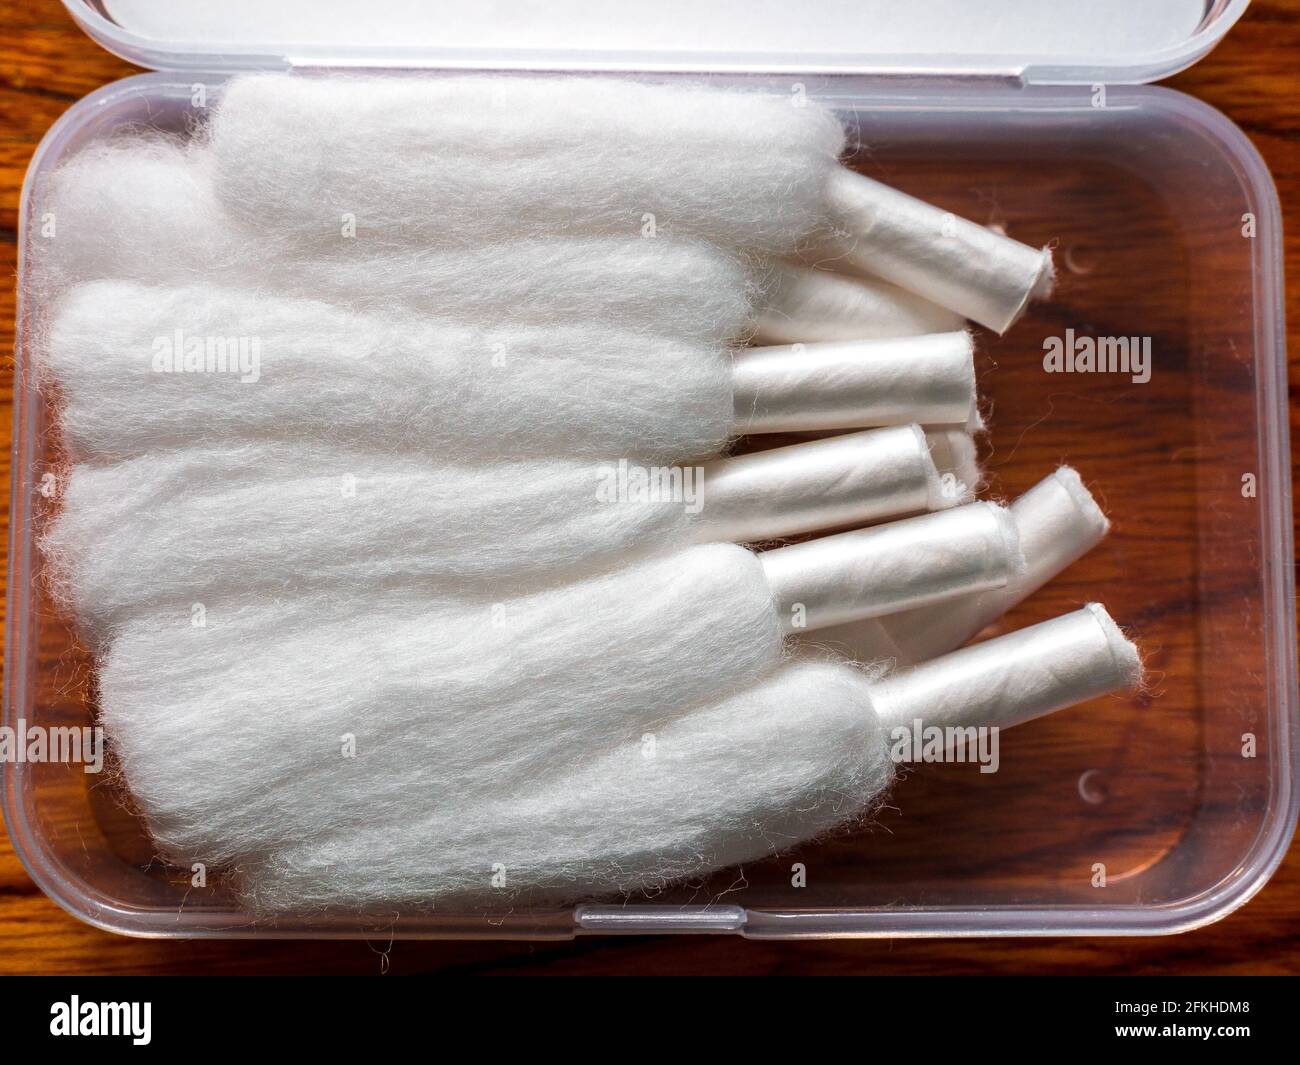 Several stripes of cotton for vaping with a sheath at one end Stock Photo